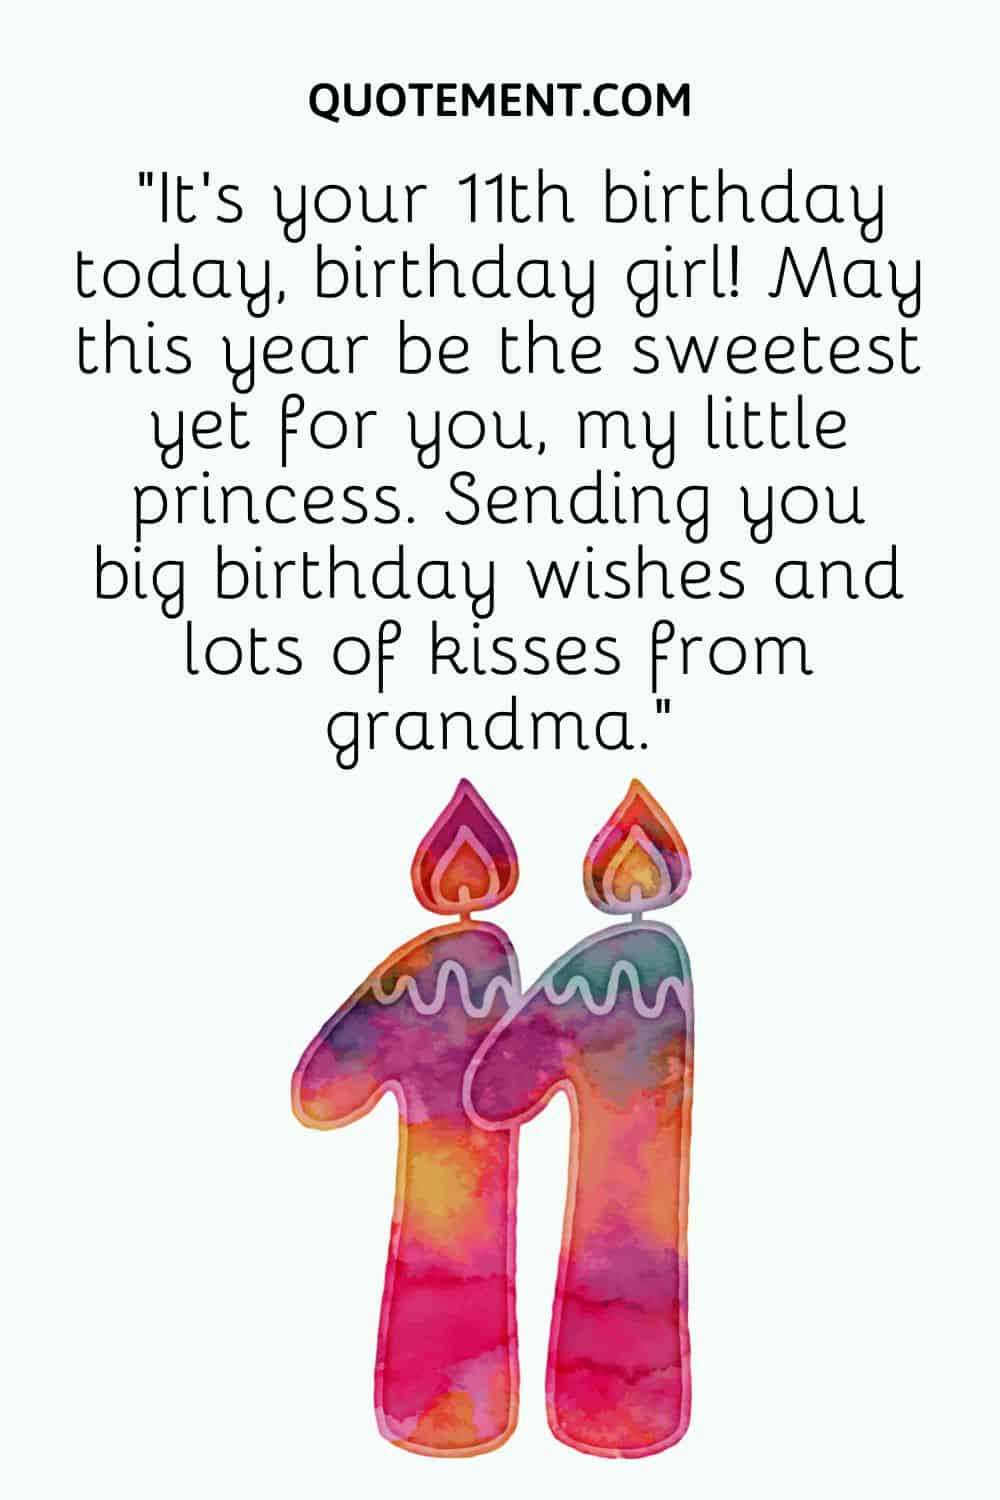 “It’s your 11th birthday today, birthday girl! May this year be the sweetest yet for you, my little princess. Sending you big birthday wishes and lots of kisses from grandma.”